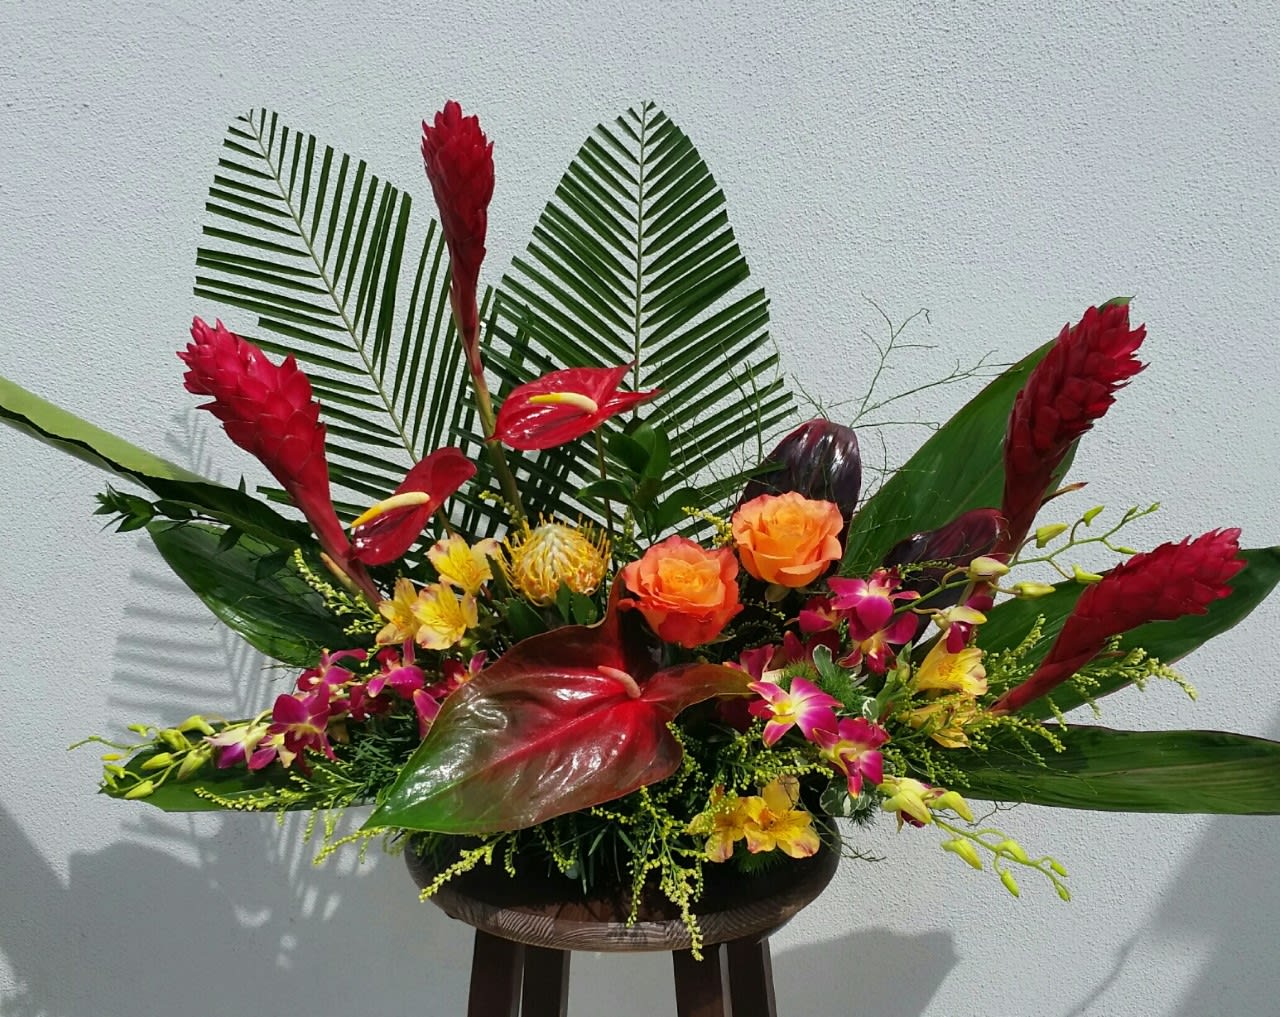 Exotic Annette - a gorgeous display of tropical blooms, ginger, anthuriums, orchids, roses....